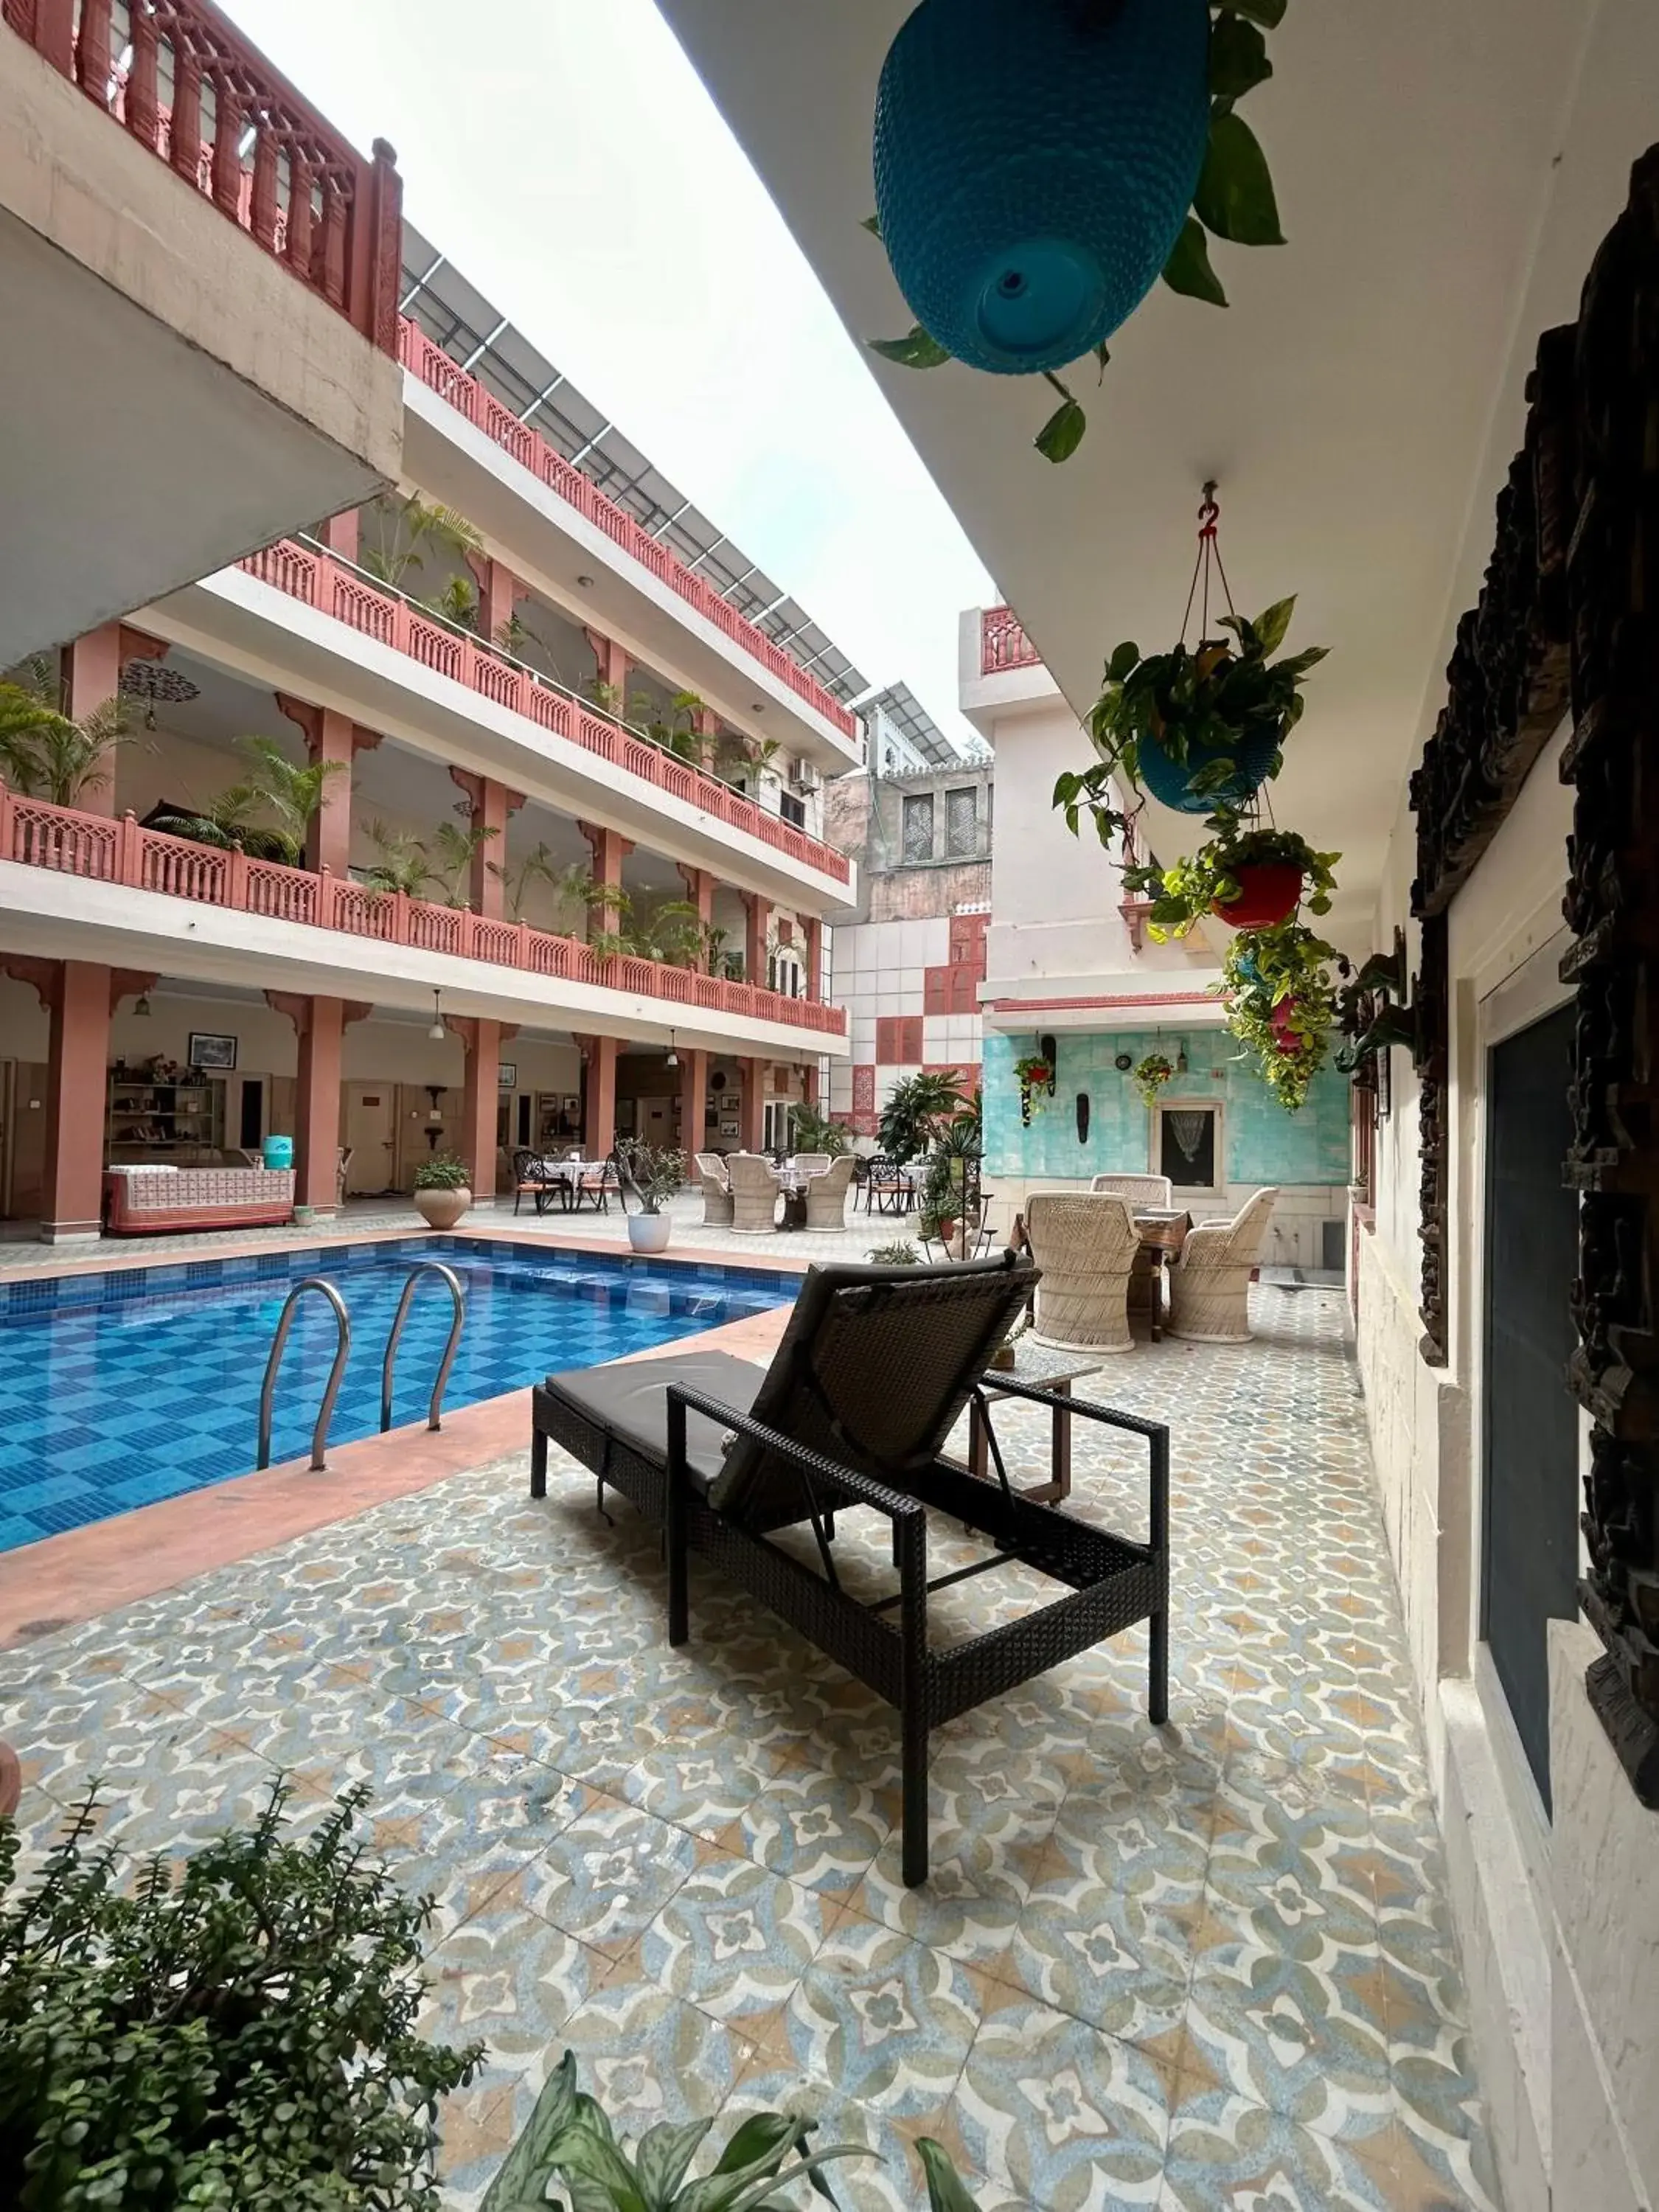 Property building, Swimming Pool in Suryaa Villa Jaipur - A Boutique Heritage Haveli